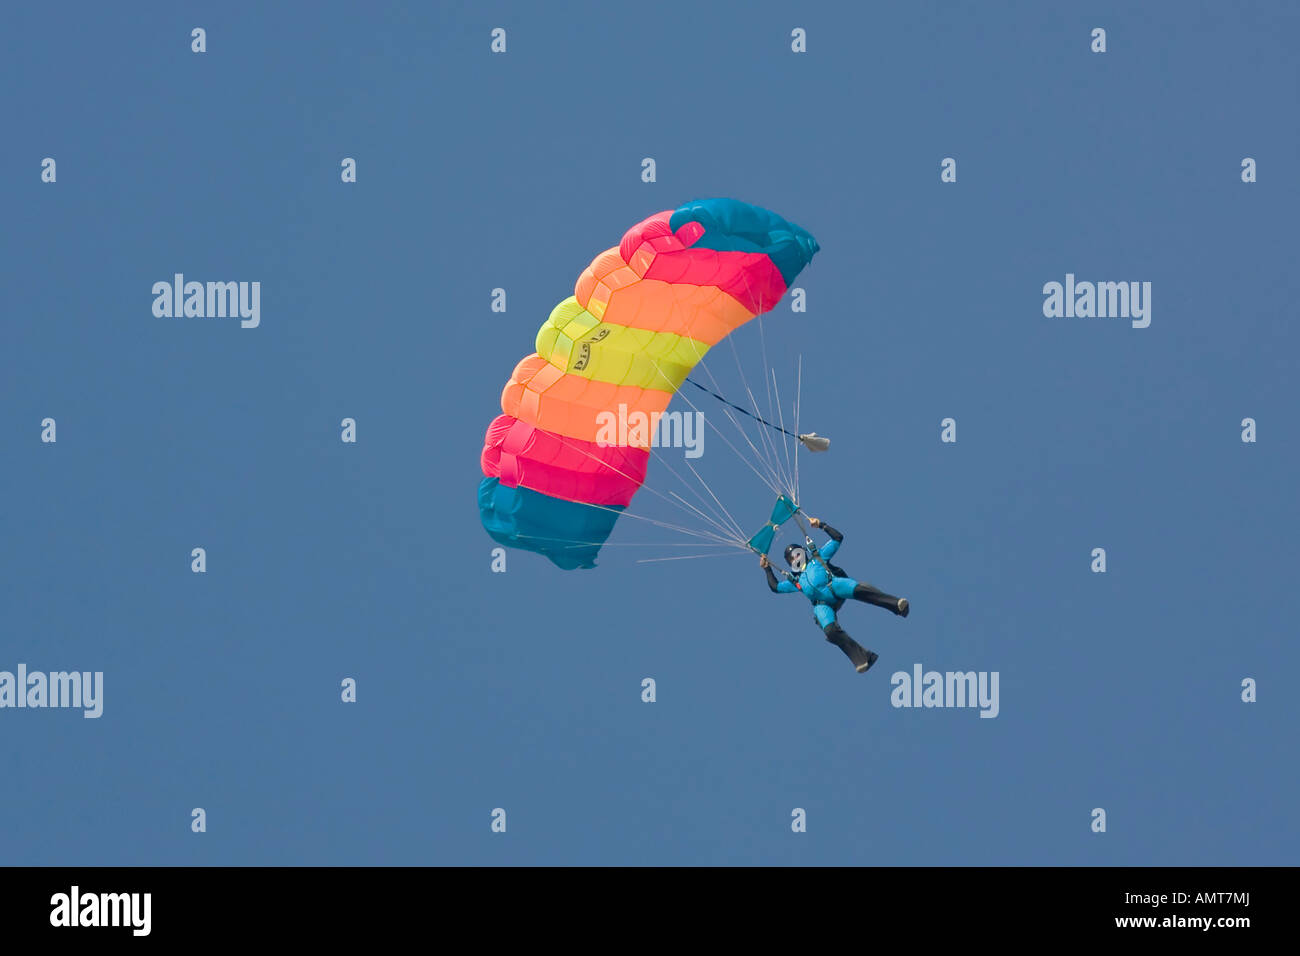 Skydiver With Rainbow Colored Parachute Stock Photo Alamy